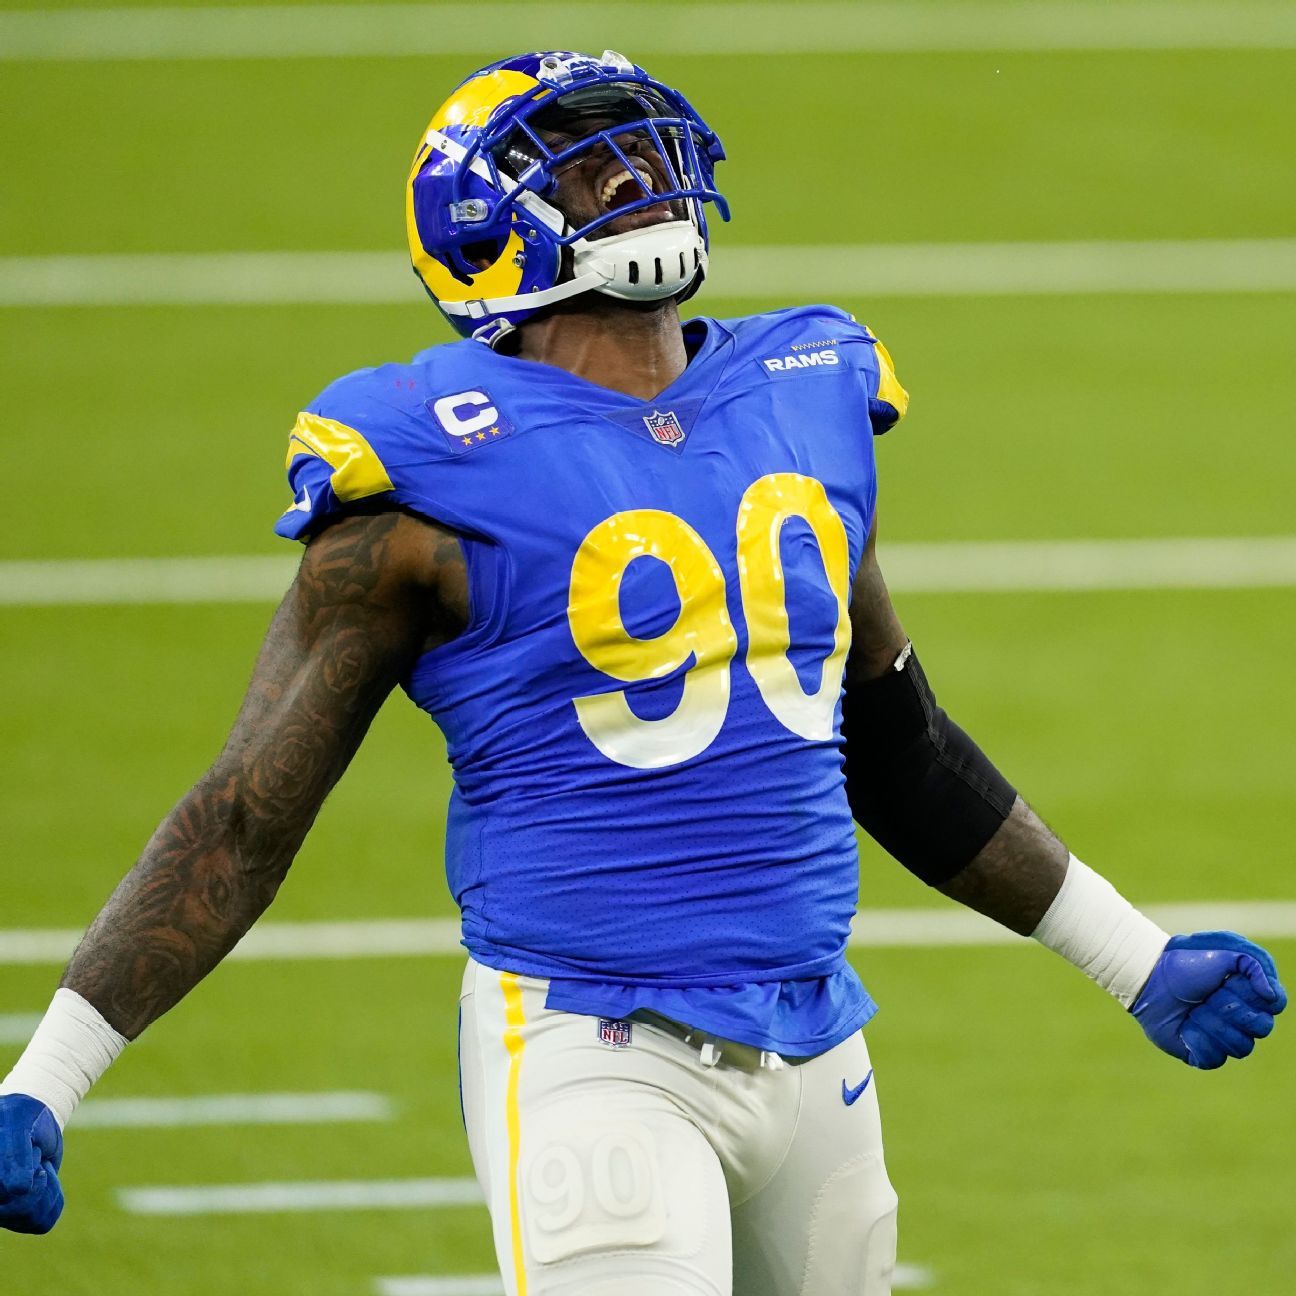 Los Angeles Rams DL Michael Brockers being traded to the Detroit Lions, the source says